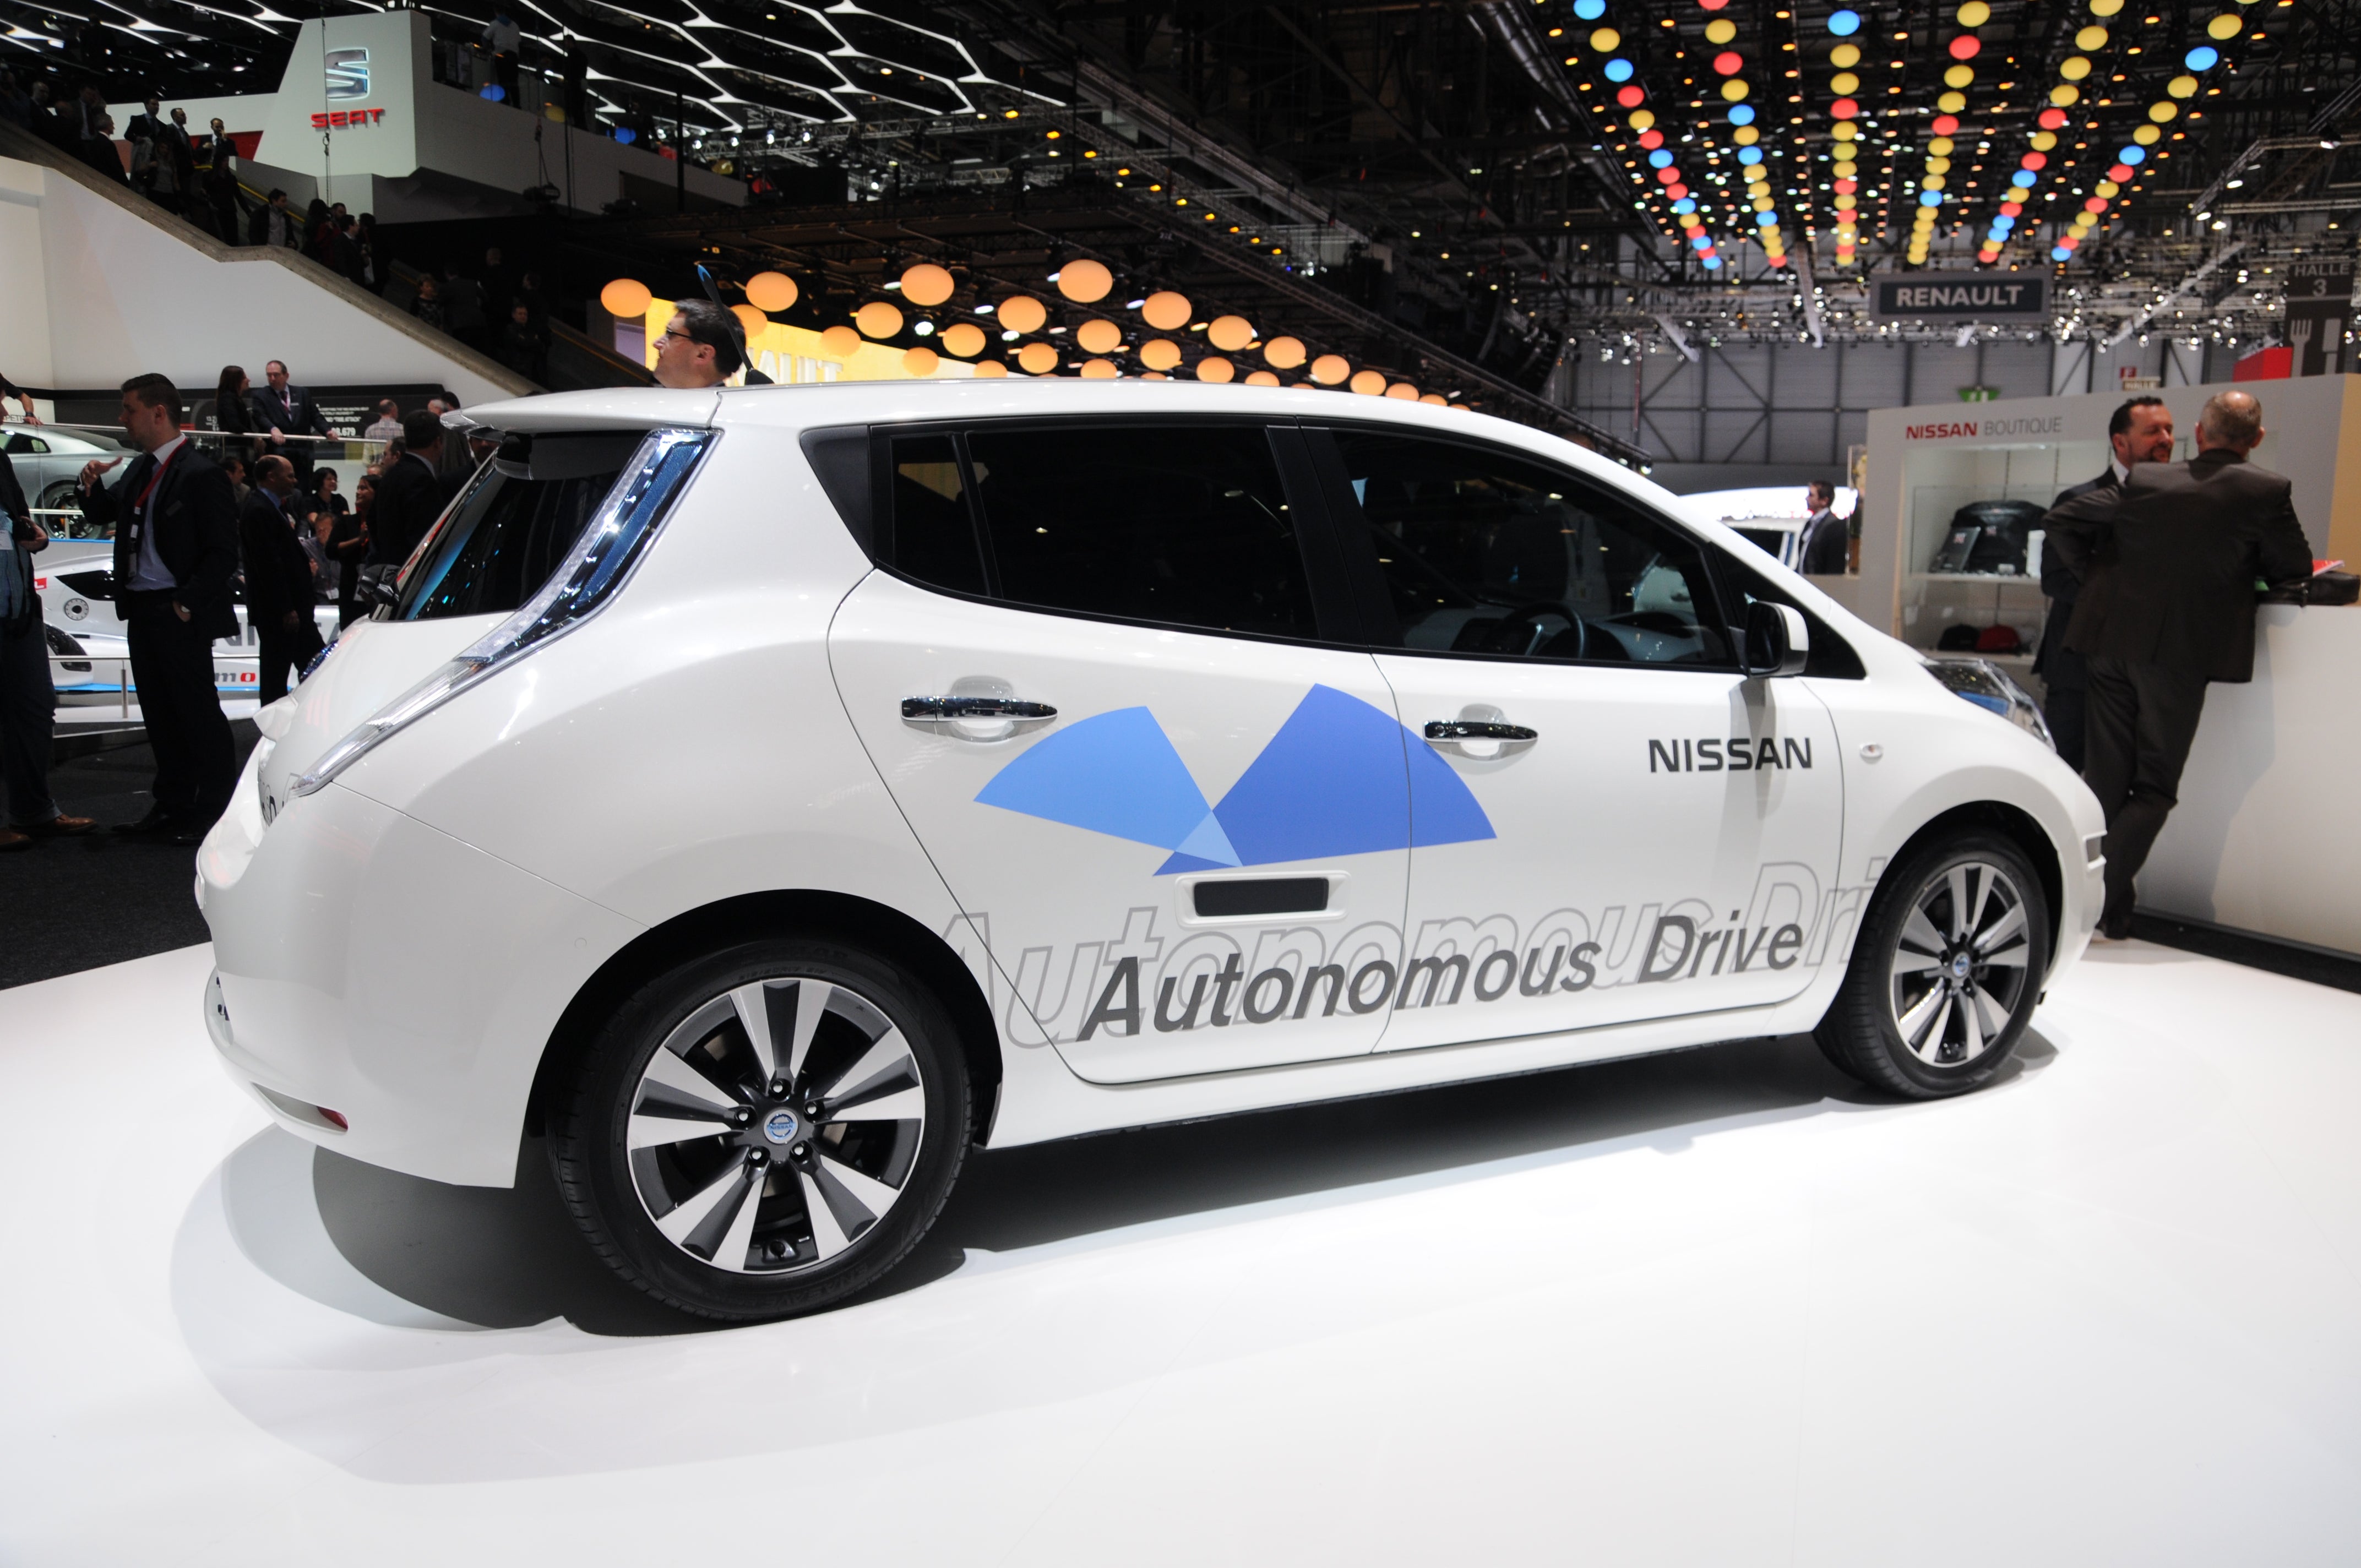 UK consumers expect autonomous cars to be the norm by 2032